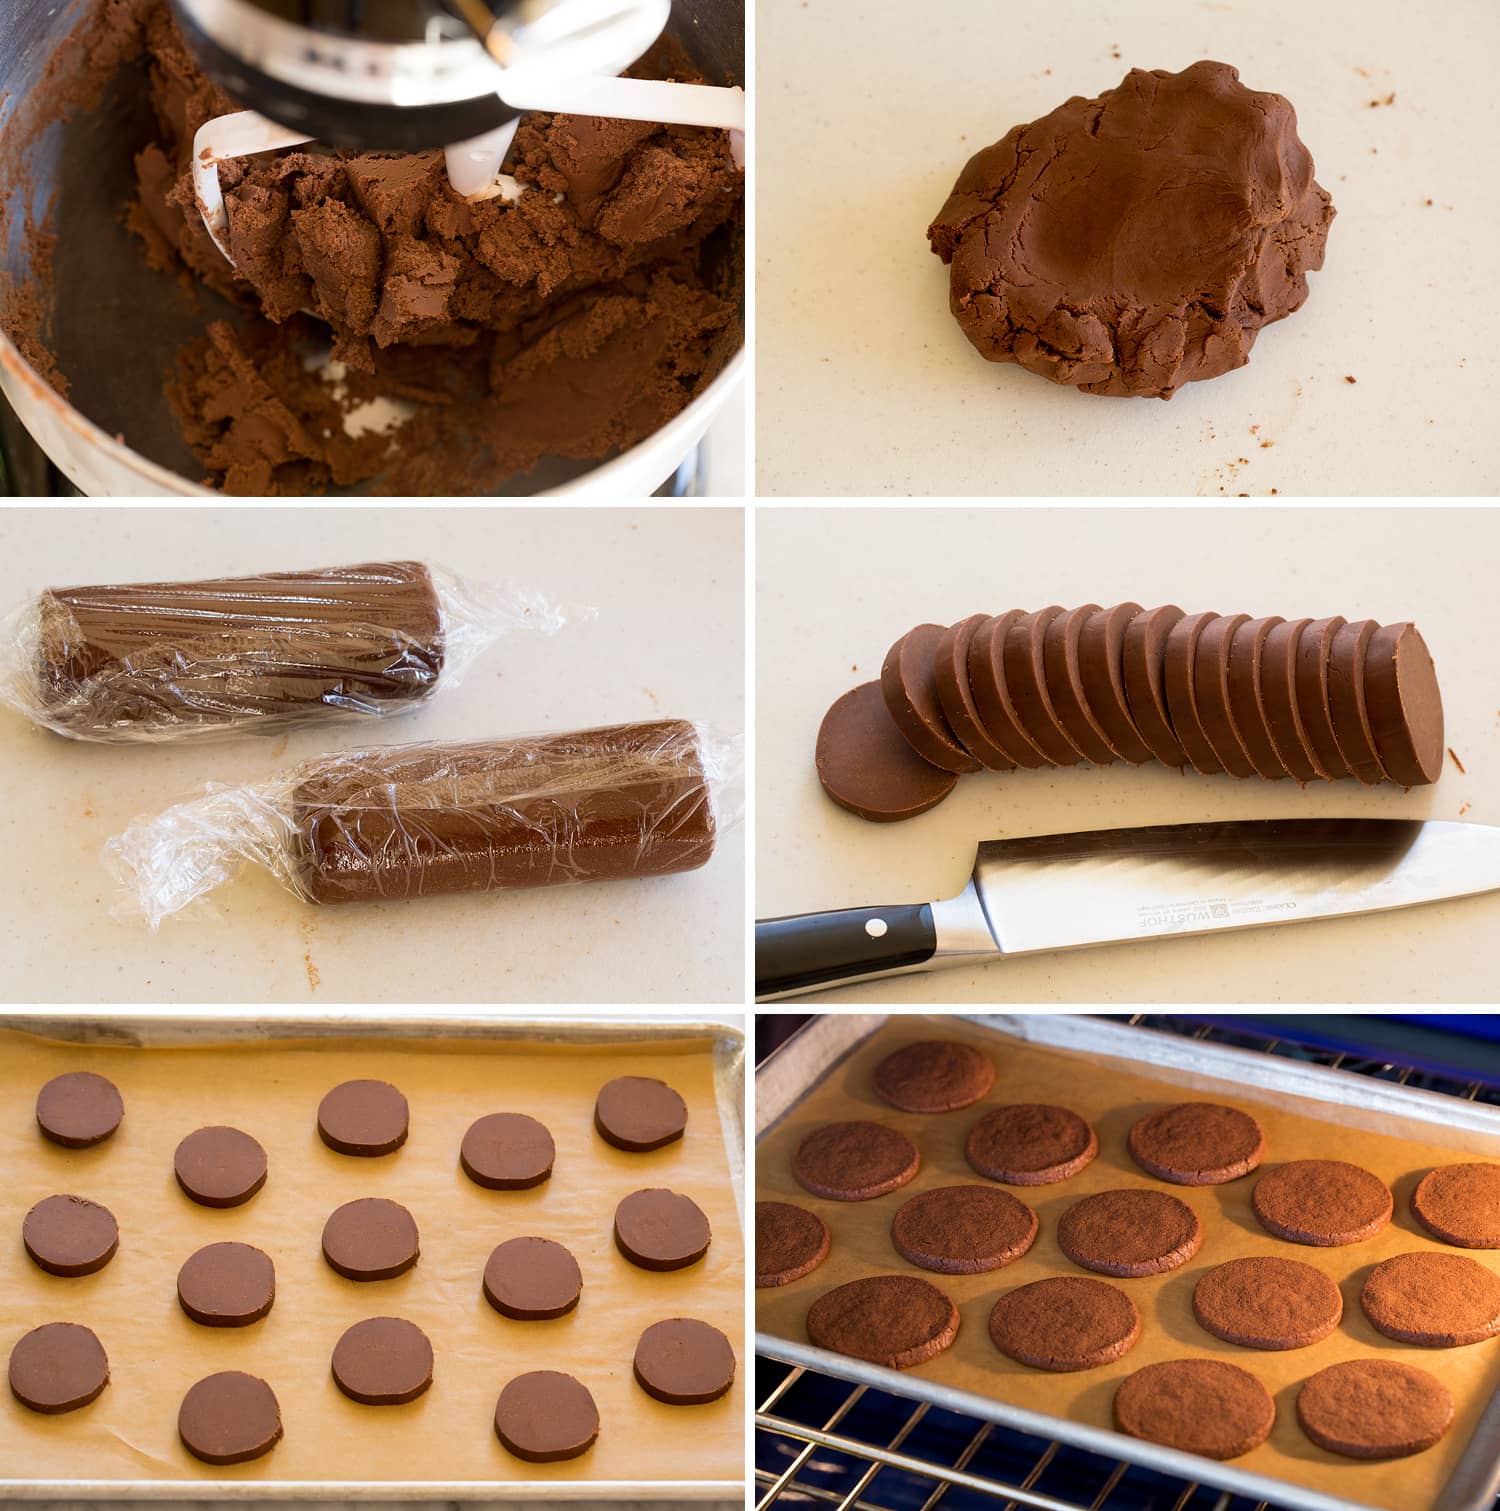 Continued six steps showing how to shape, slice and bake shortbread cookies.